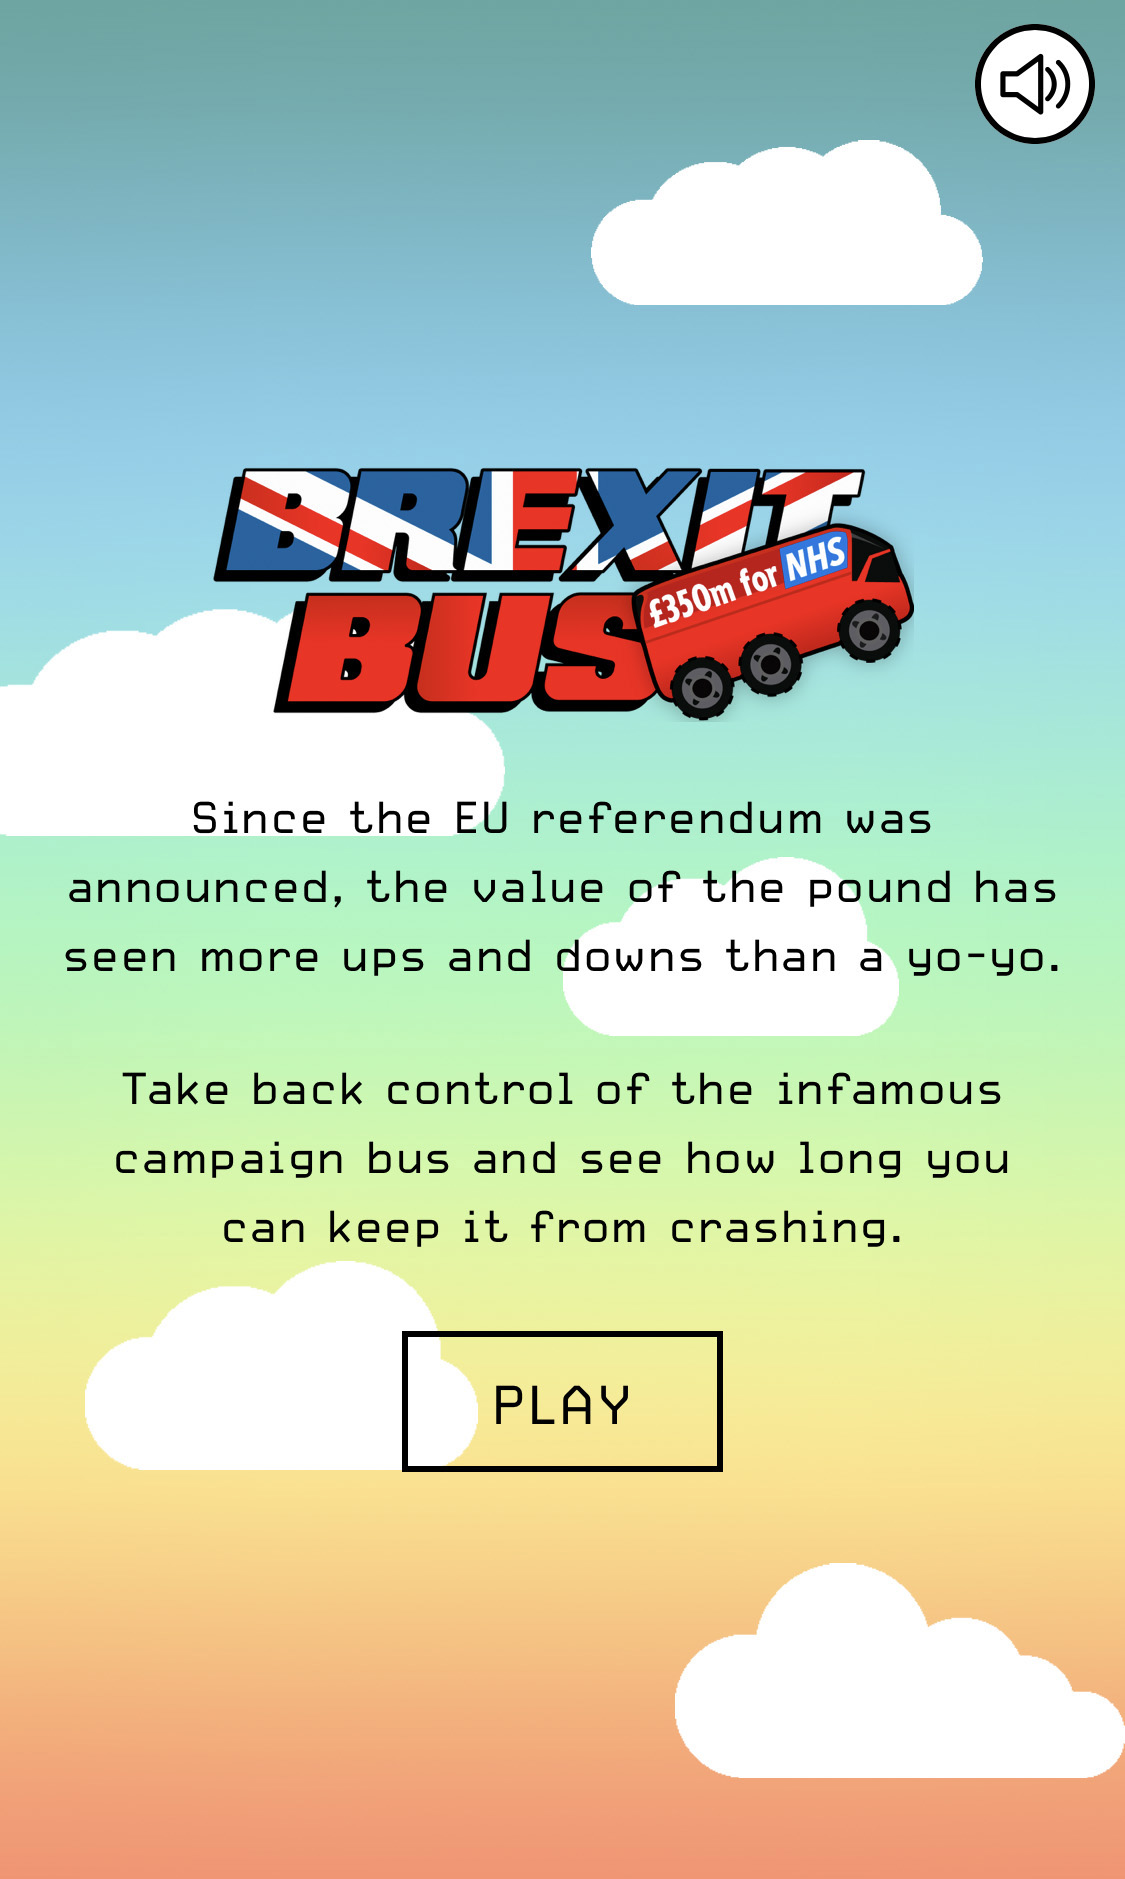 Ride the Brexit Bus and see how long you can keep it going from crashing 